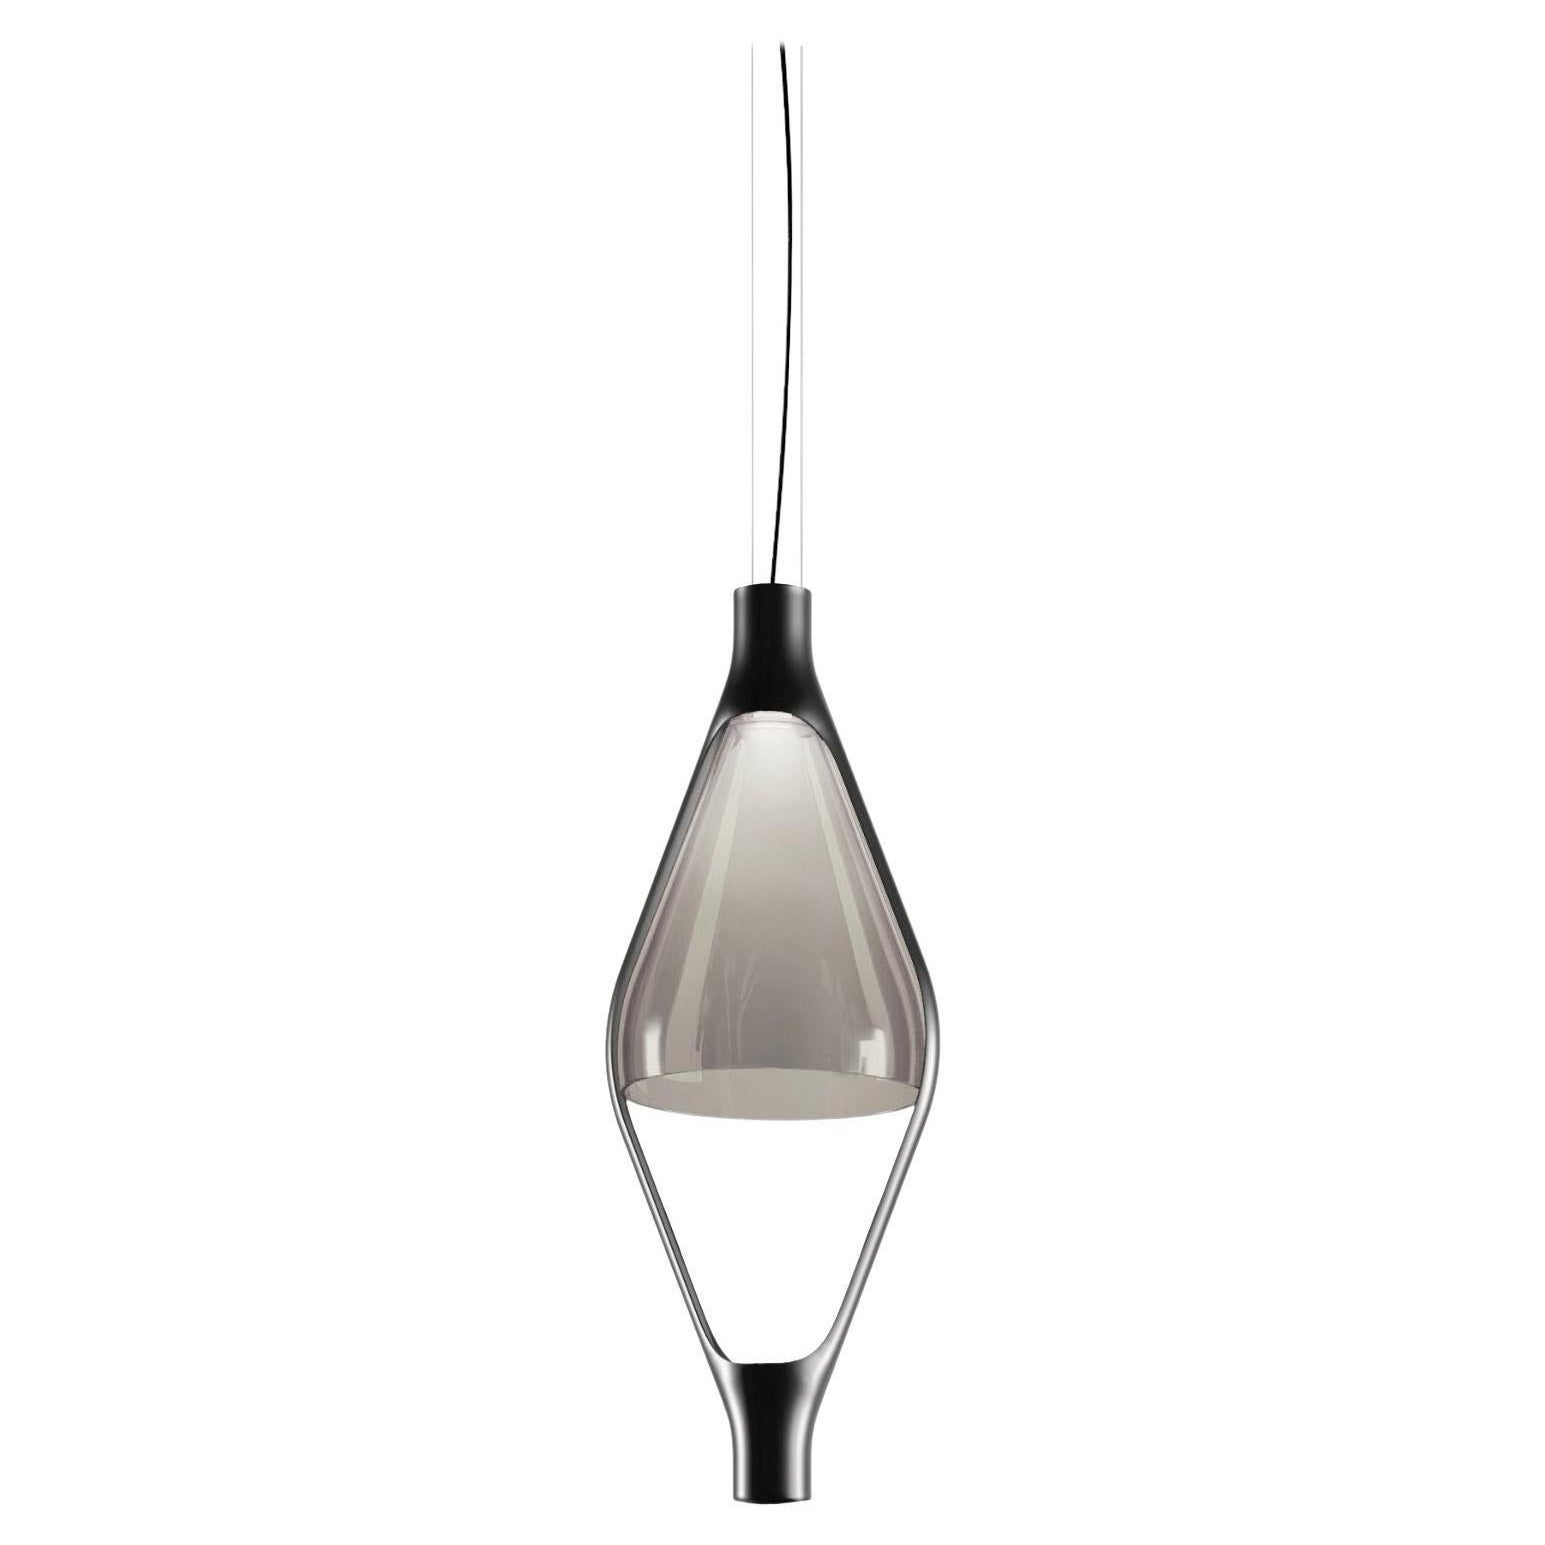 'Viceversa' Modular Suspension Lamp by Noé Lawrance for Kdln in Smoke Grey For Sale